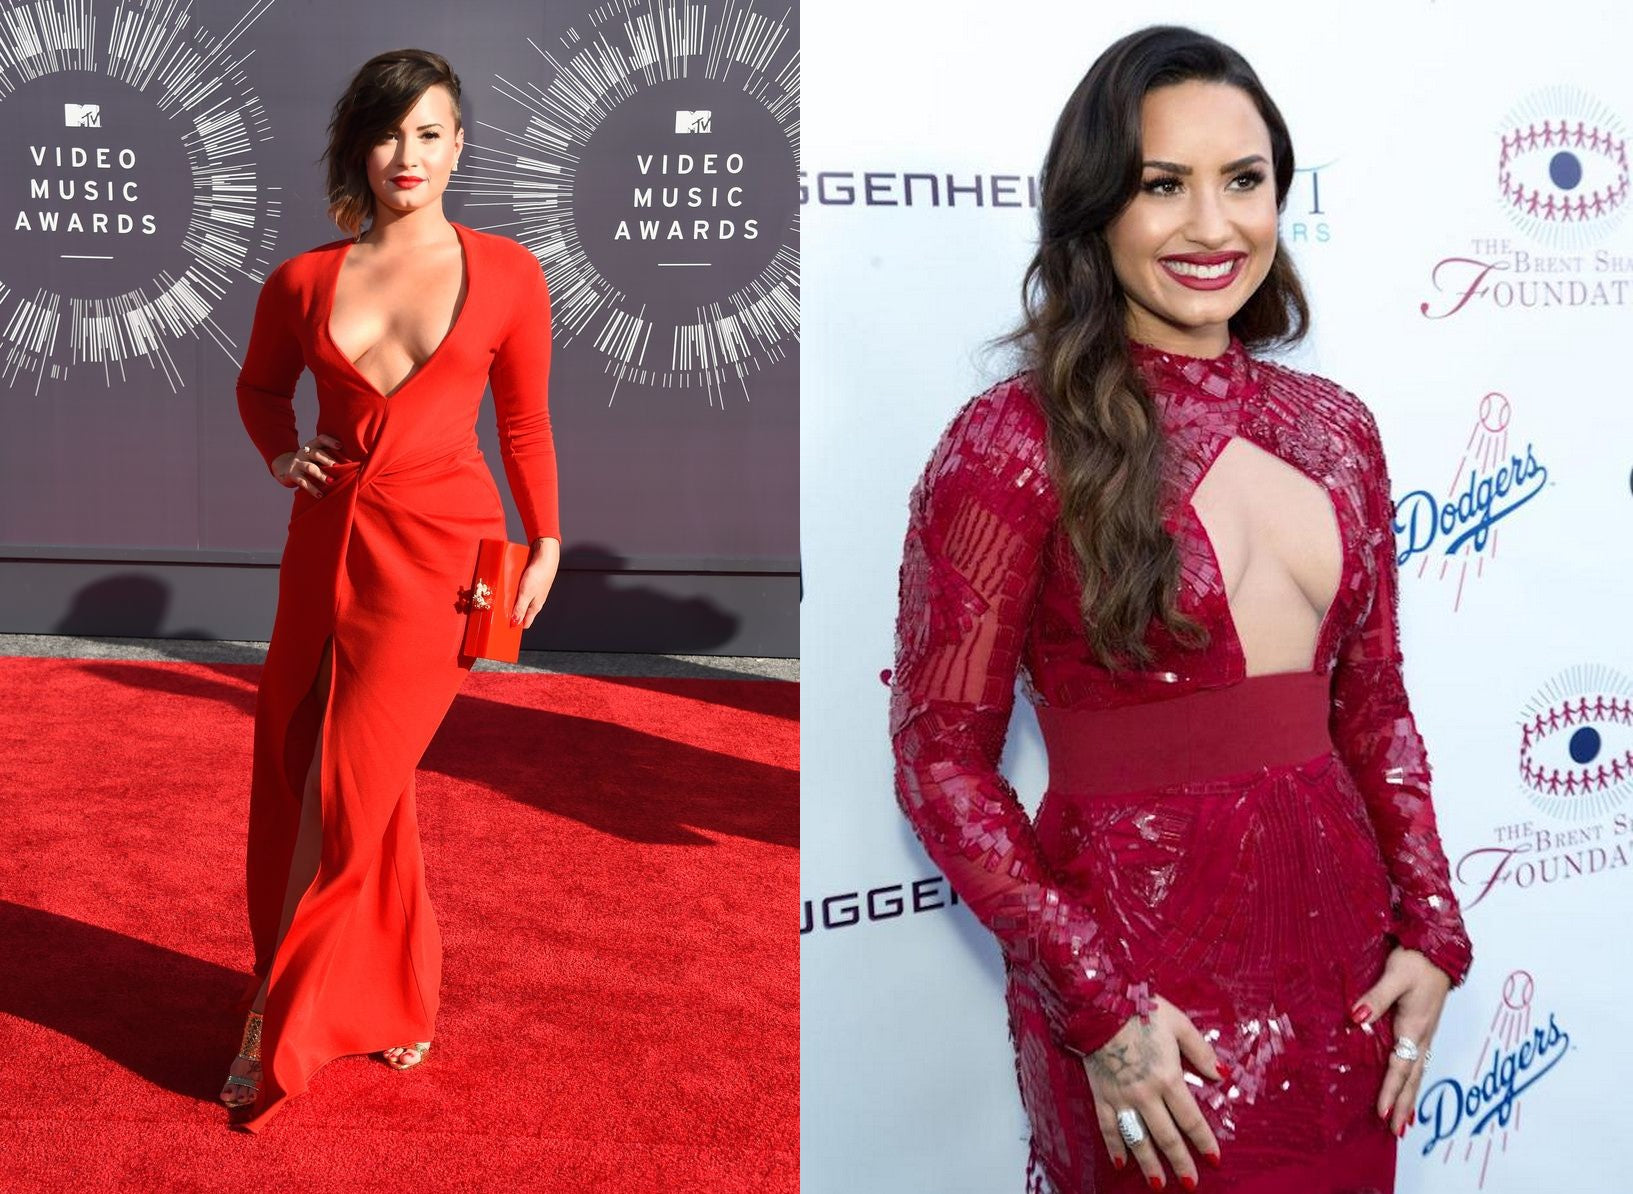 two images of singer-songwriter Demi Lovato wearing two different red/dark-red dresses at separate premieres.